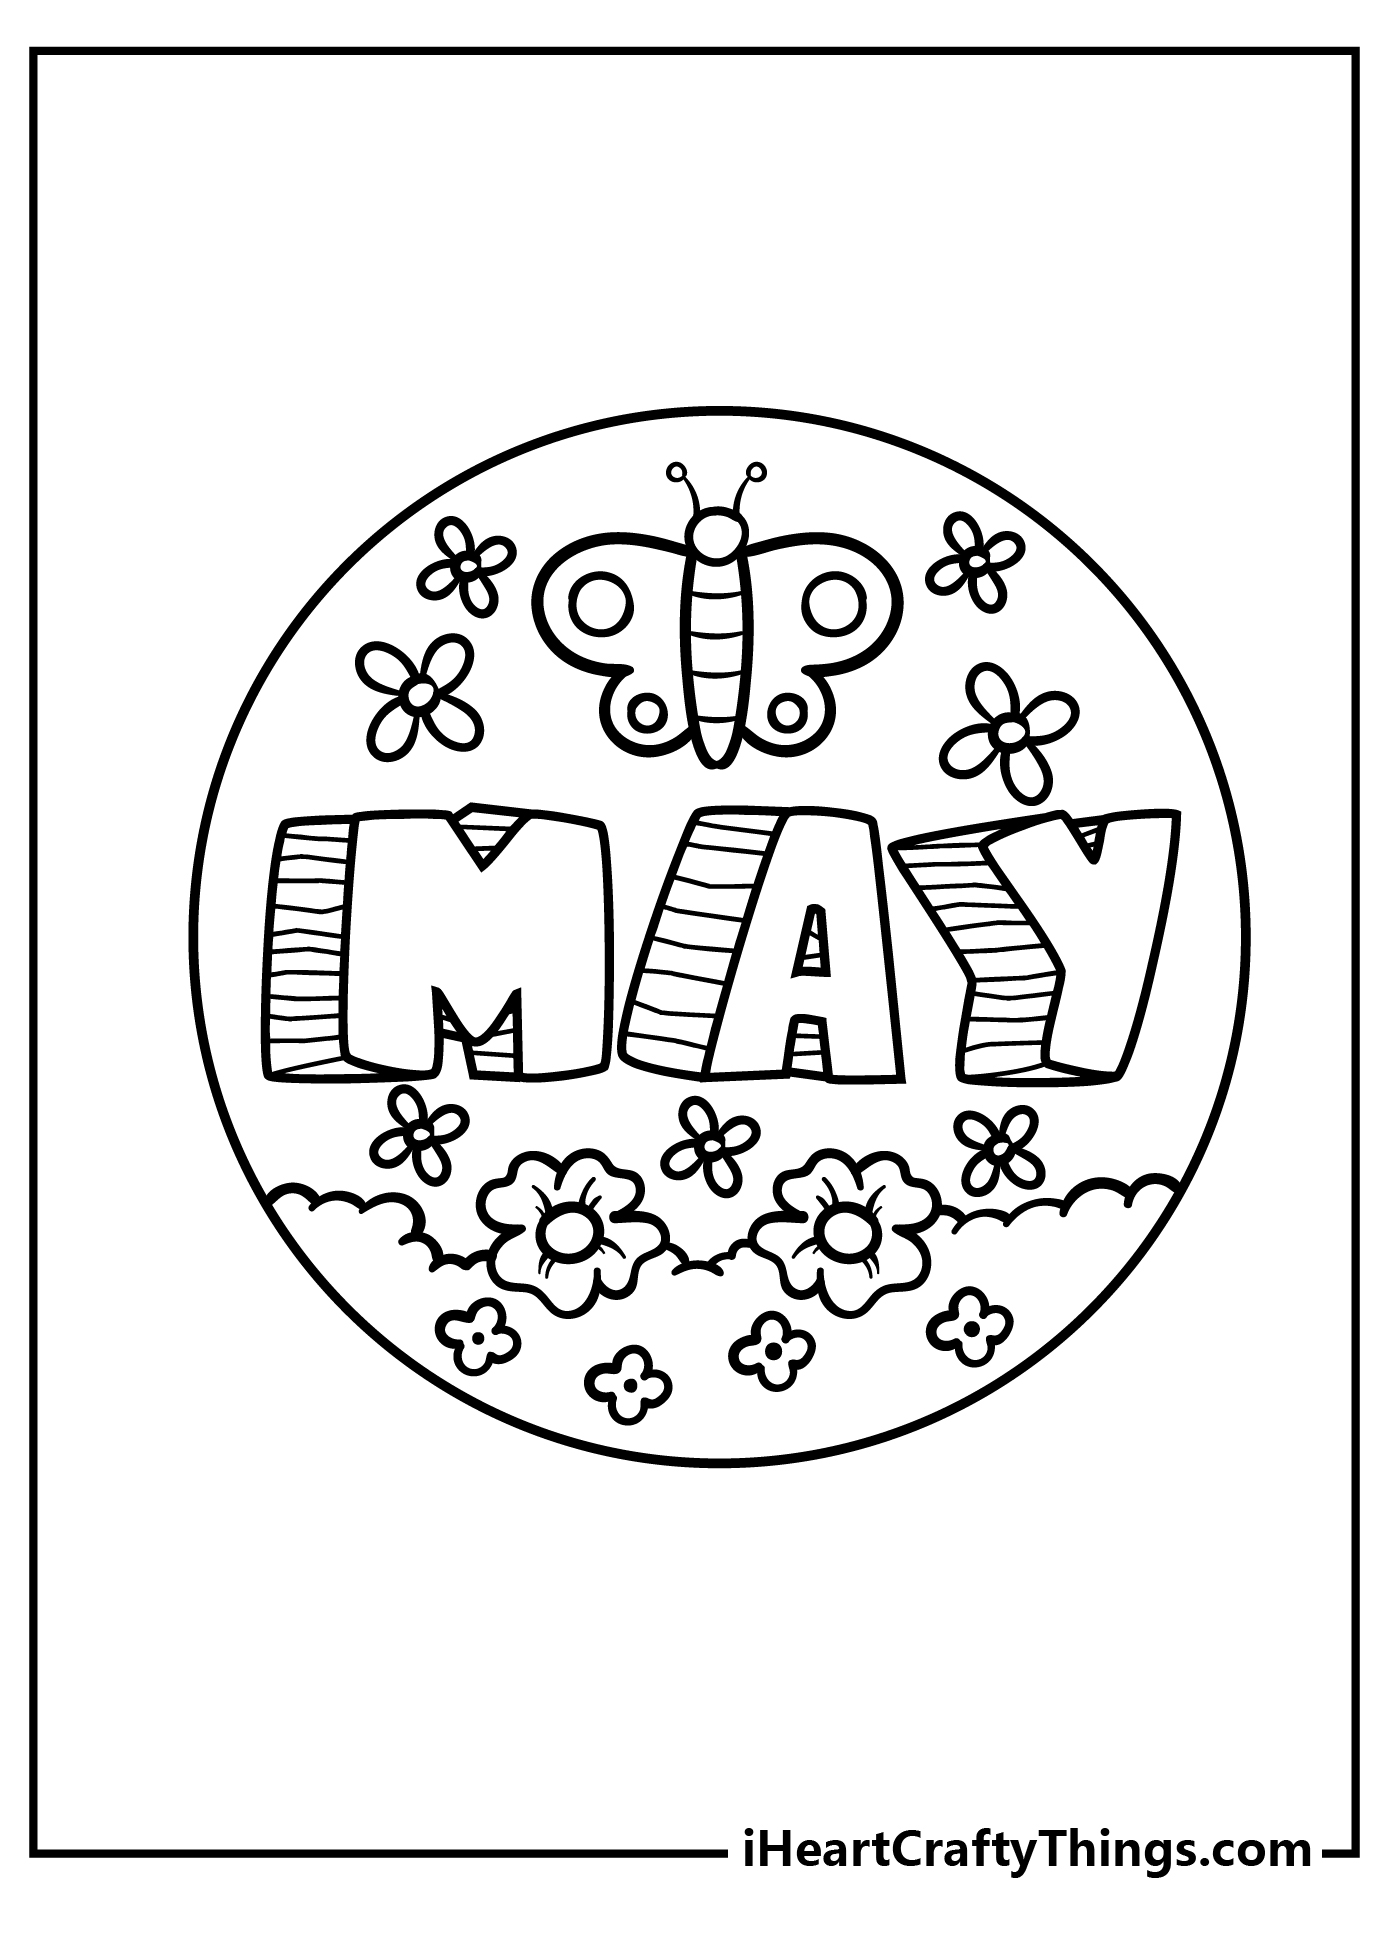 May Coloring Pages for kids free download